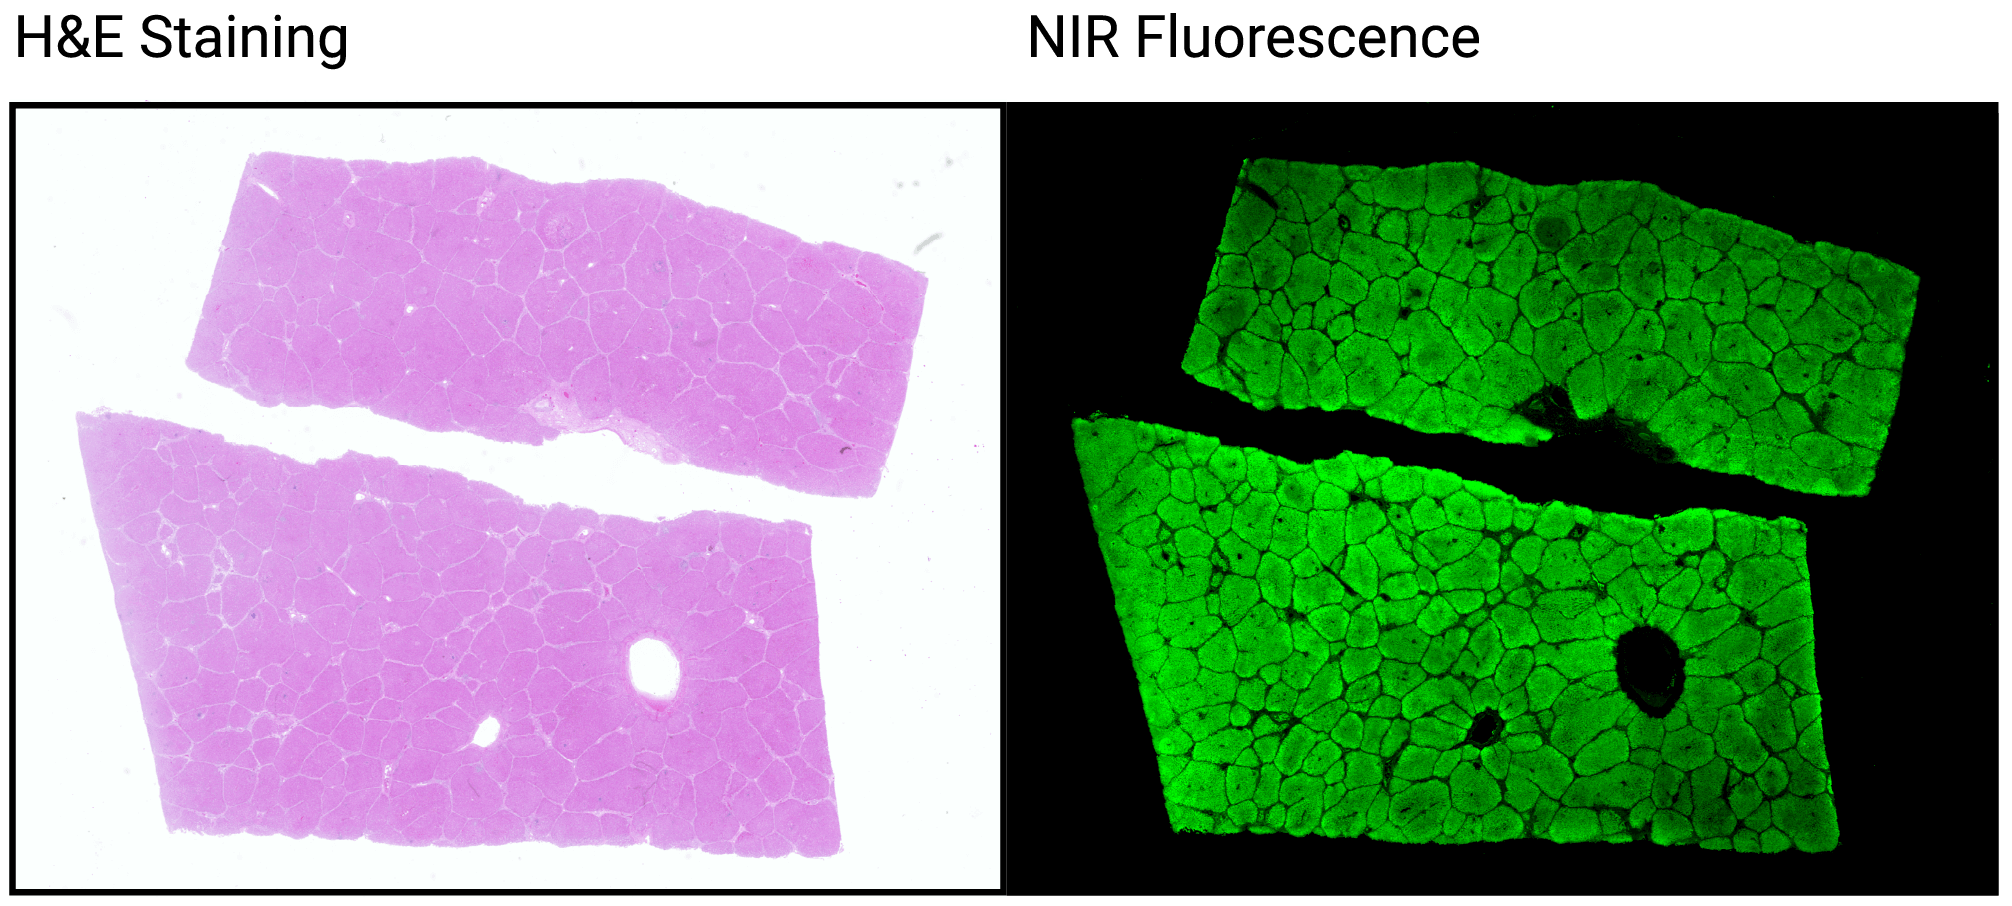 Comparison of H&E Stained slide and a fluorescent slide.